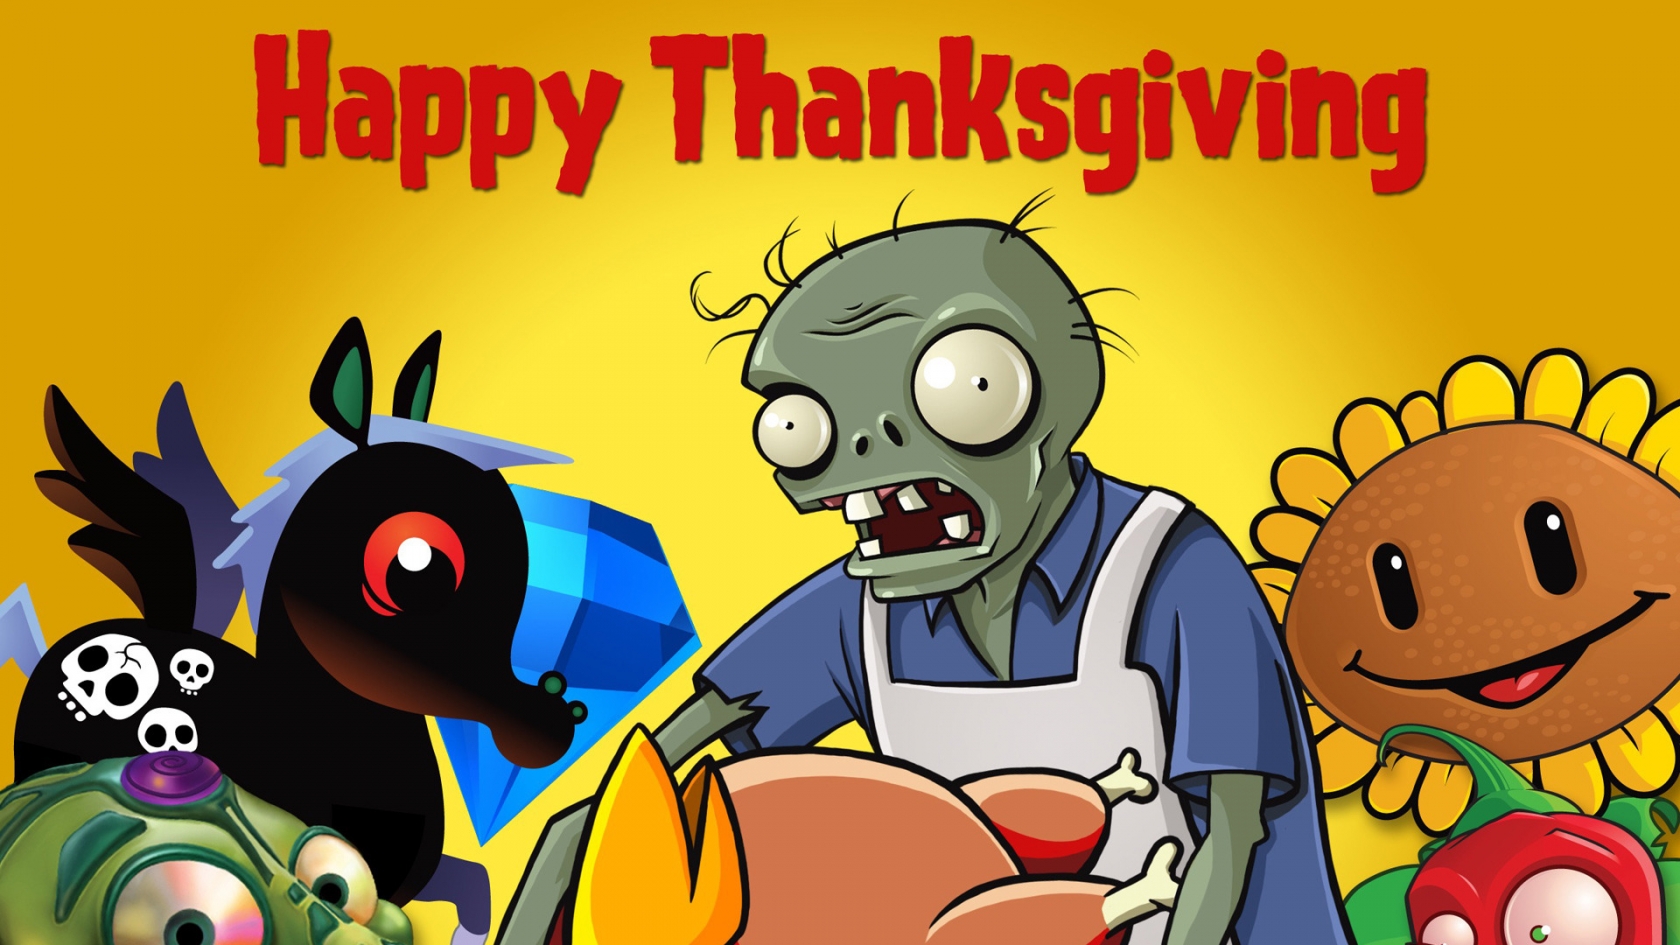 Happy Thanksgiving for 1680 x 945 HDTV resolution